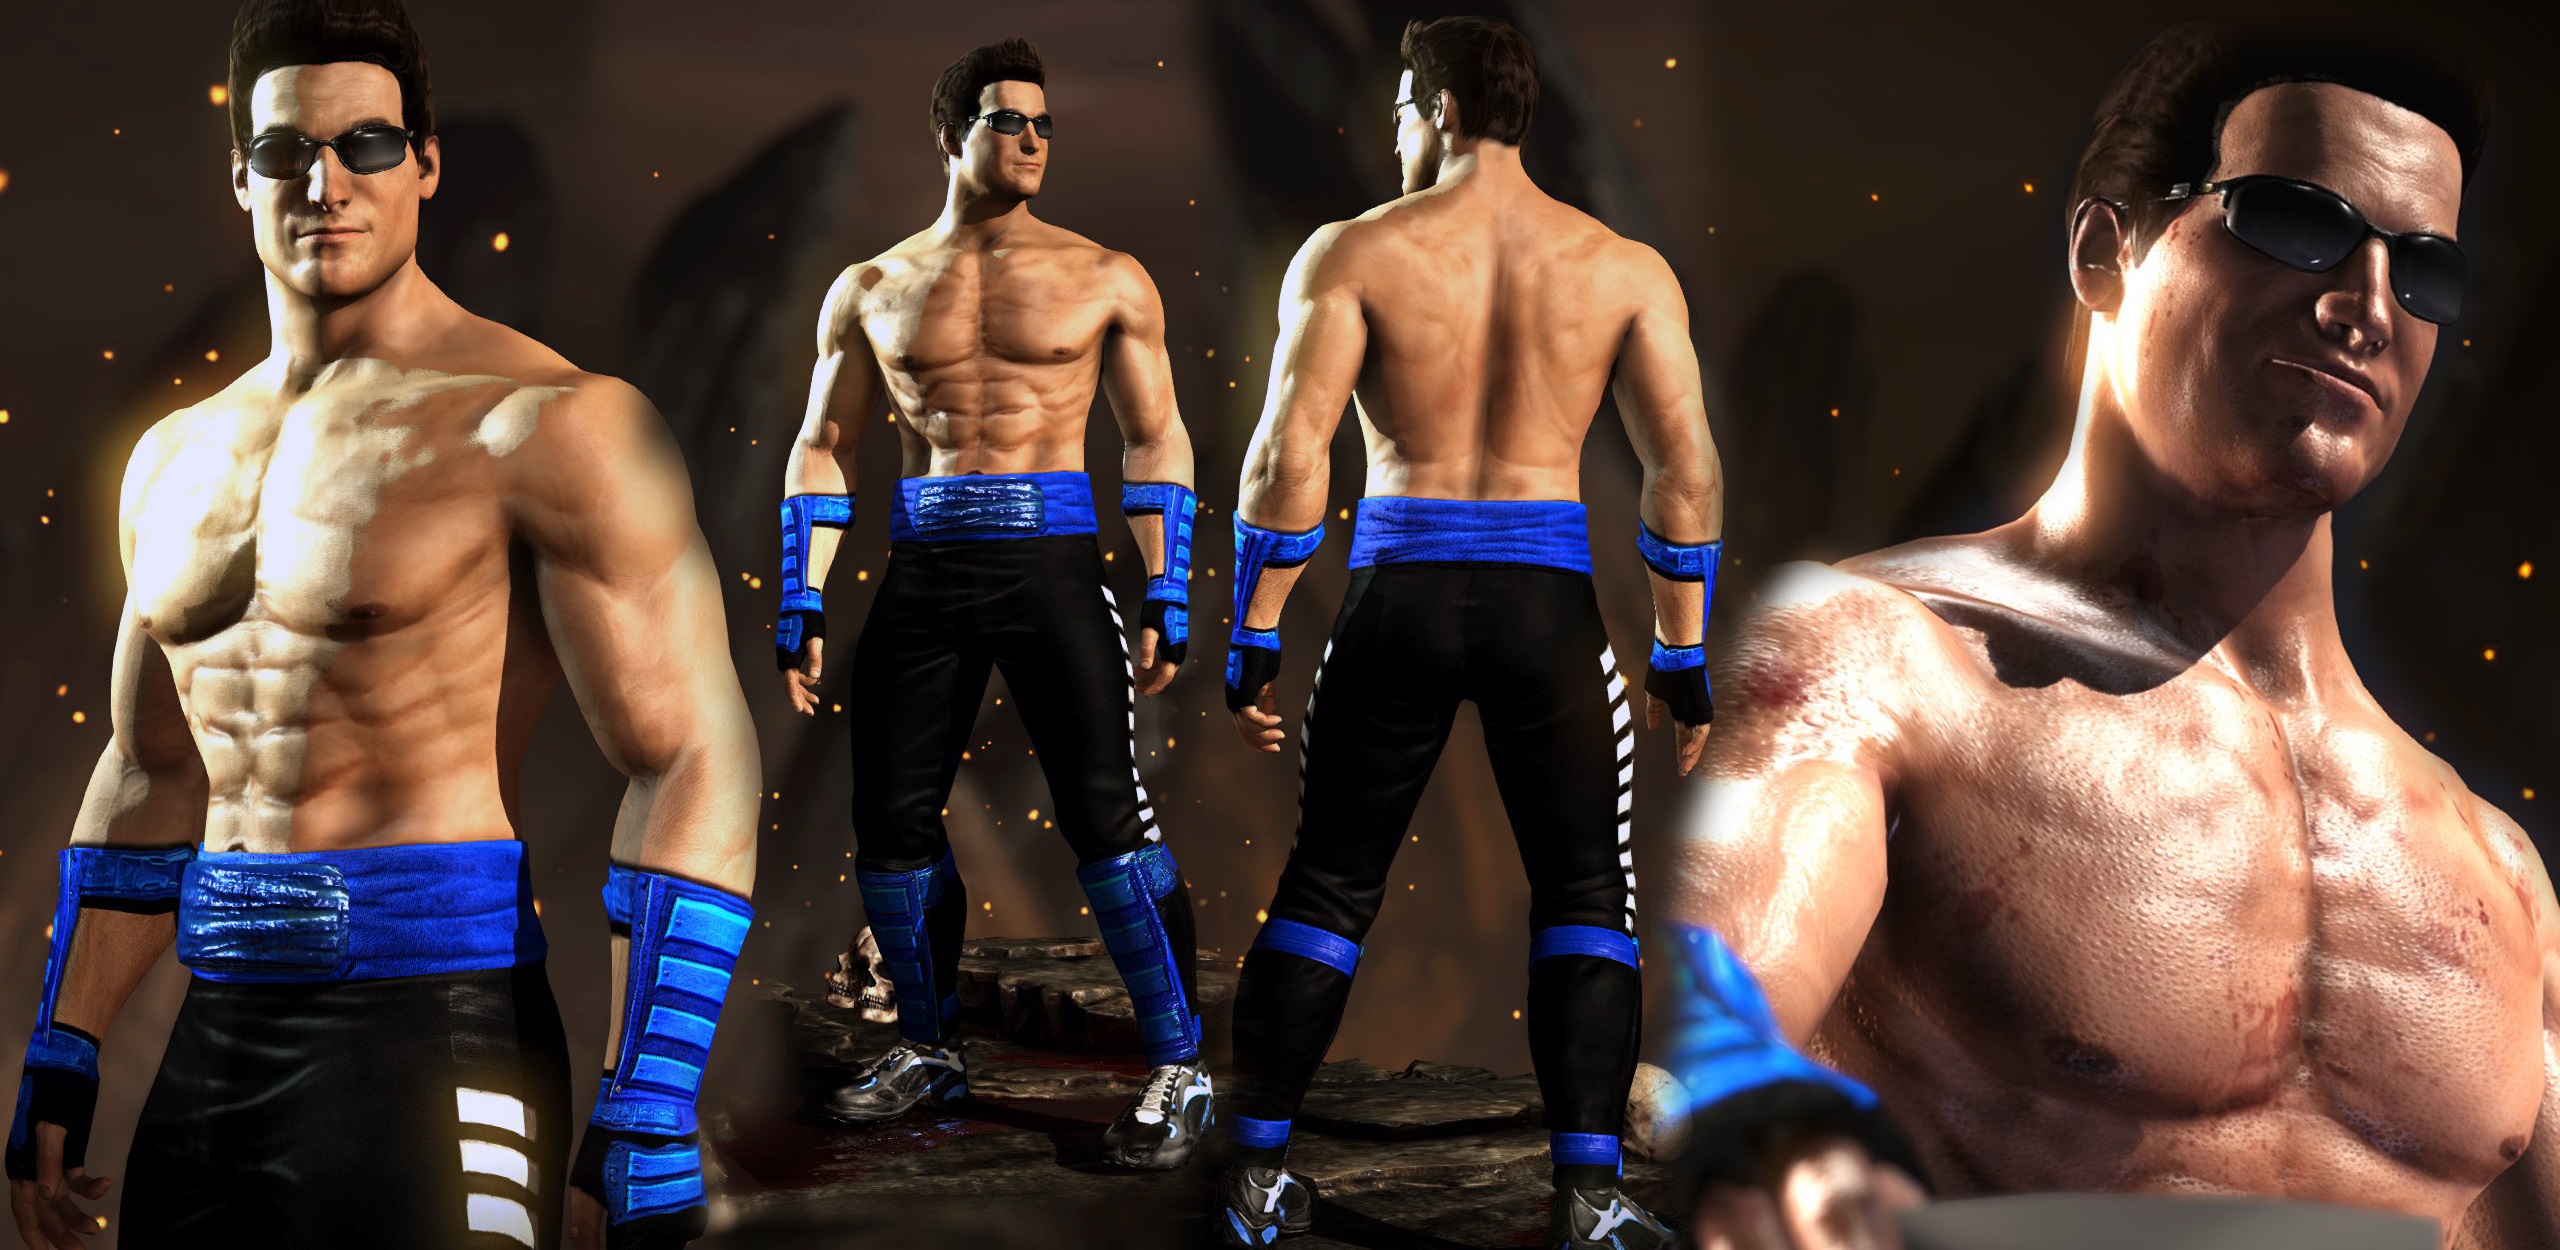 Image 6 - MKX - [ MK4 Skin Pack ] by King Kolossos mod for 